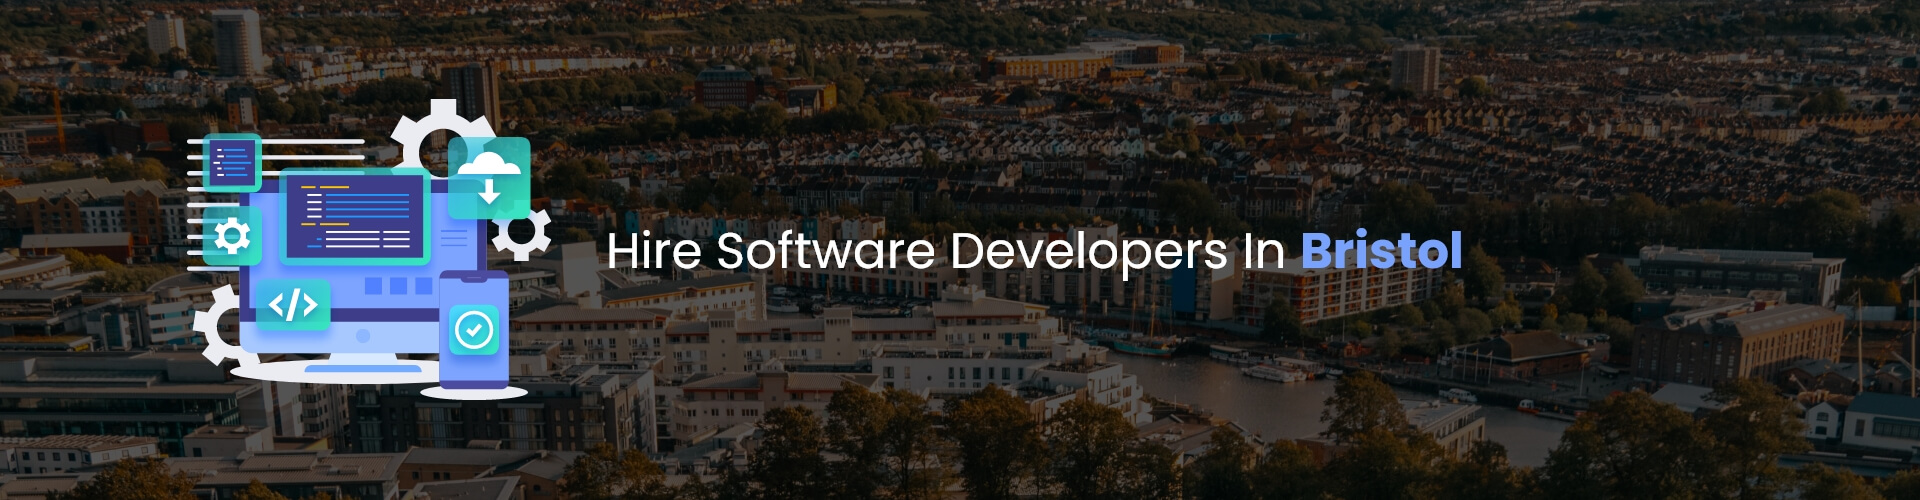 hire software developers in bristol